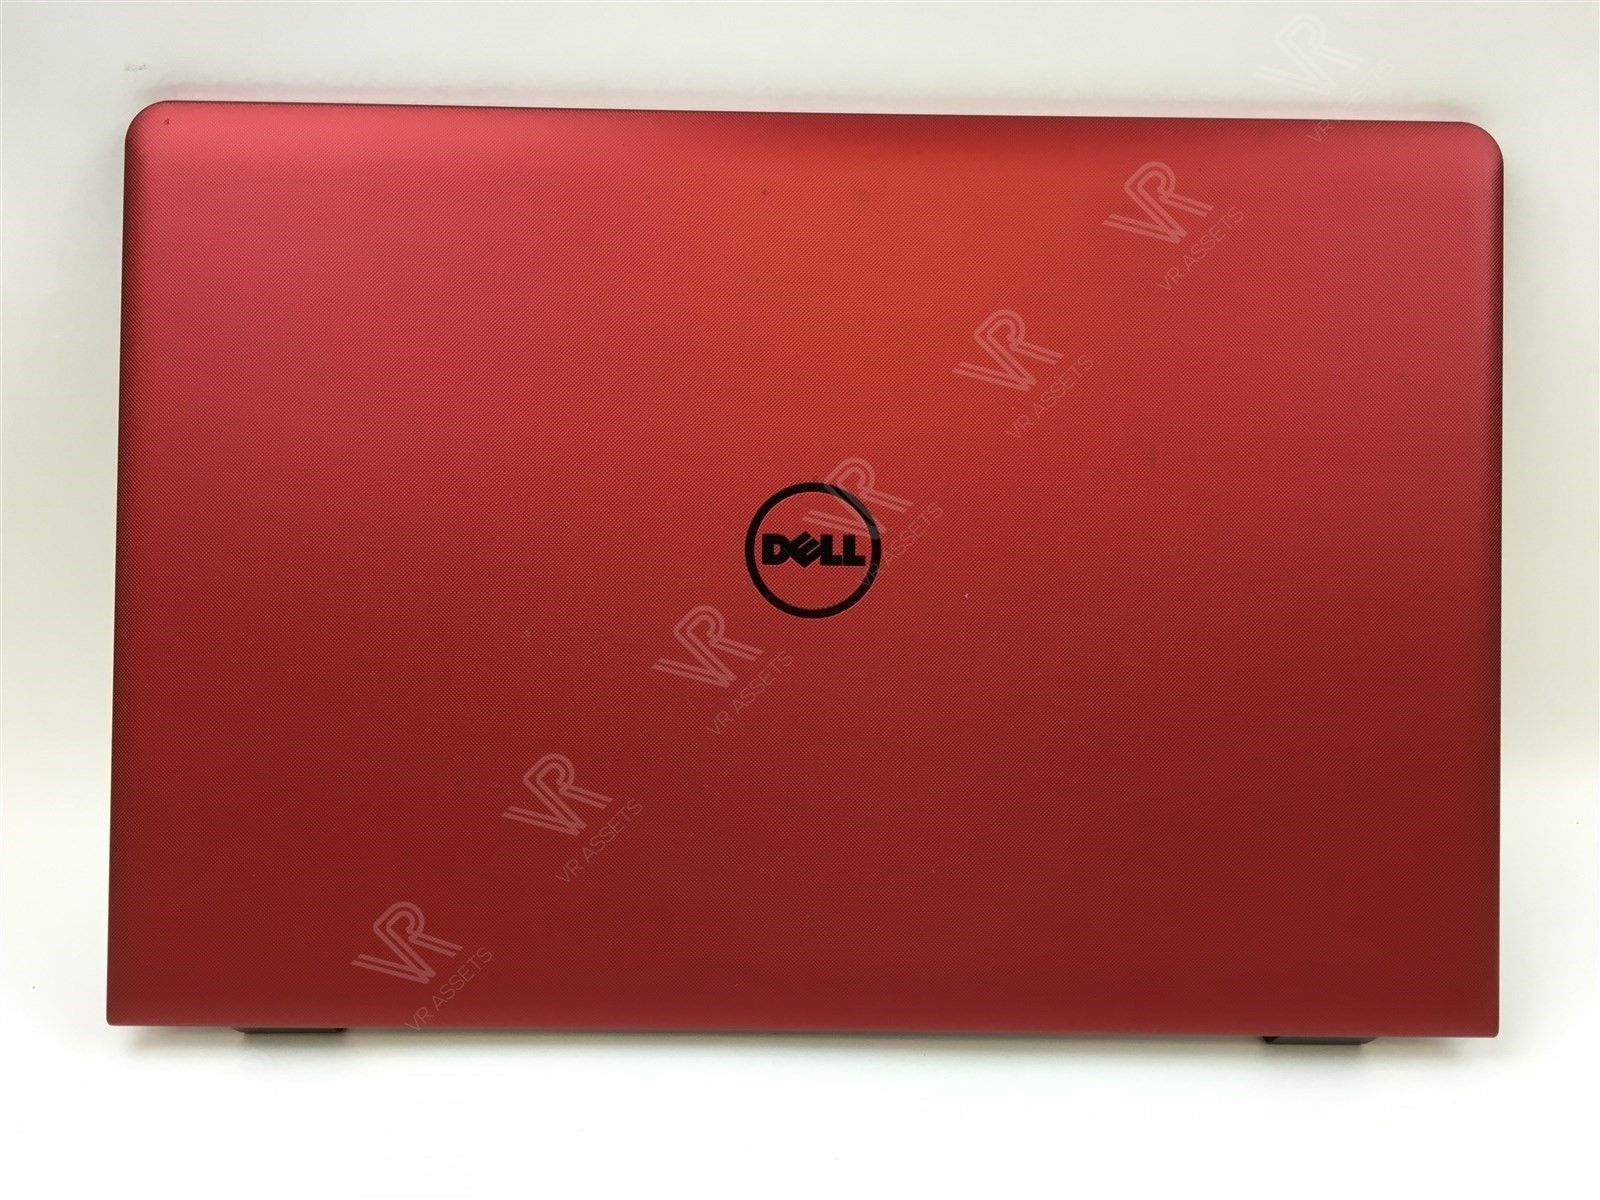 Genuine Dell Inspiron 5755 LCD Cover Lid 17.3" Red Housing 338H9 0338H9